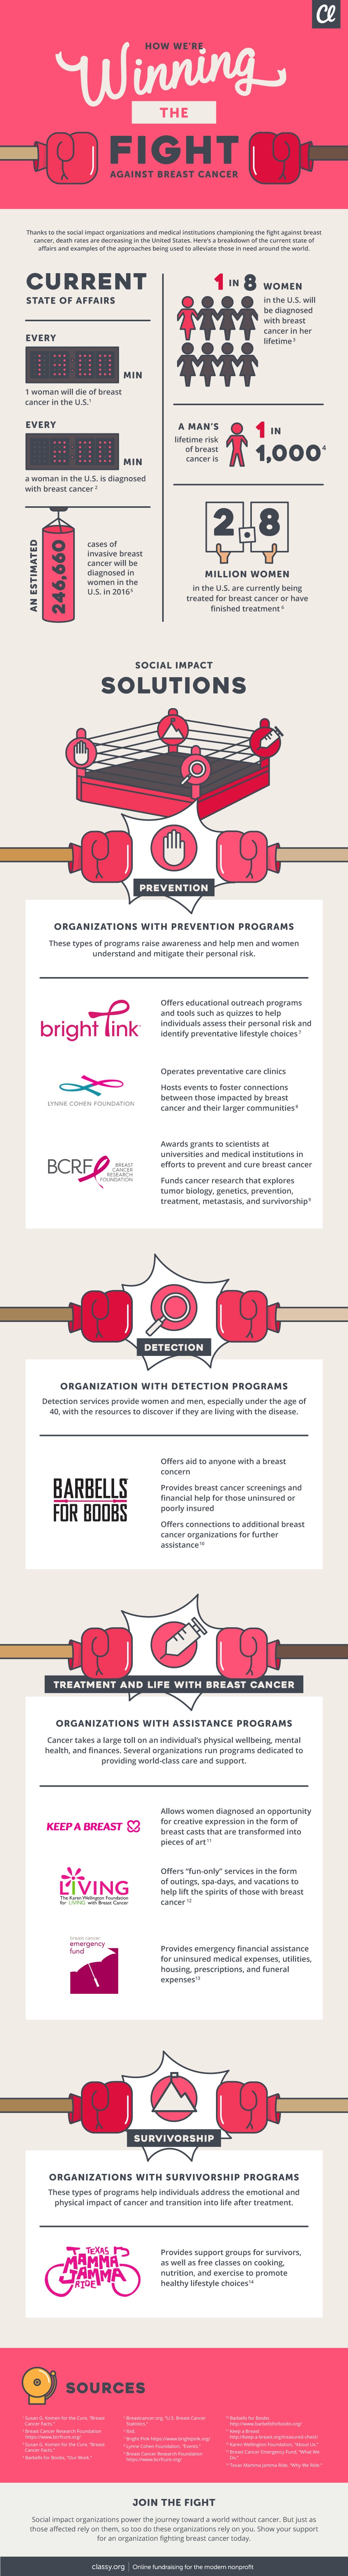 how nonprofits fight breast cancer infographic 